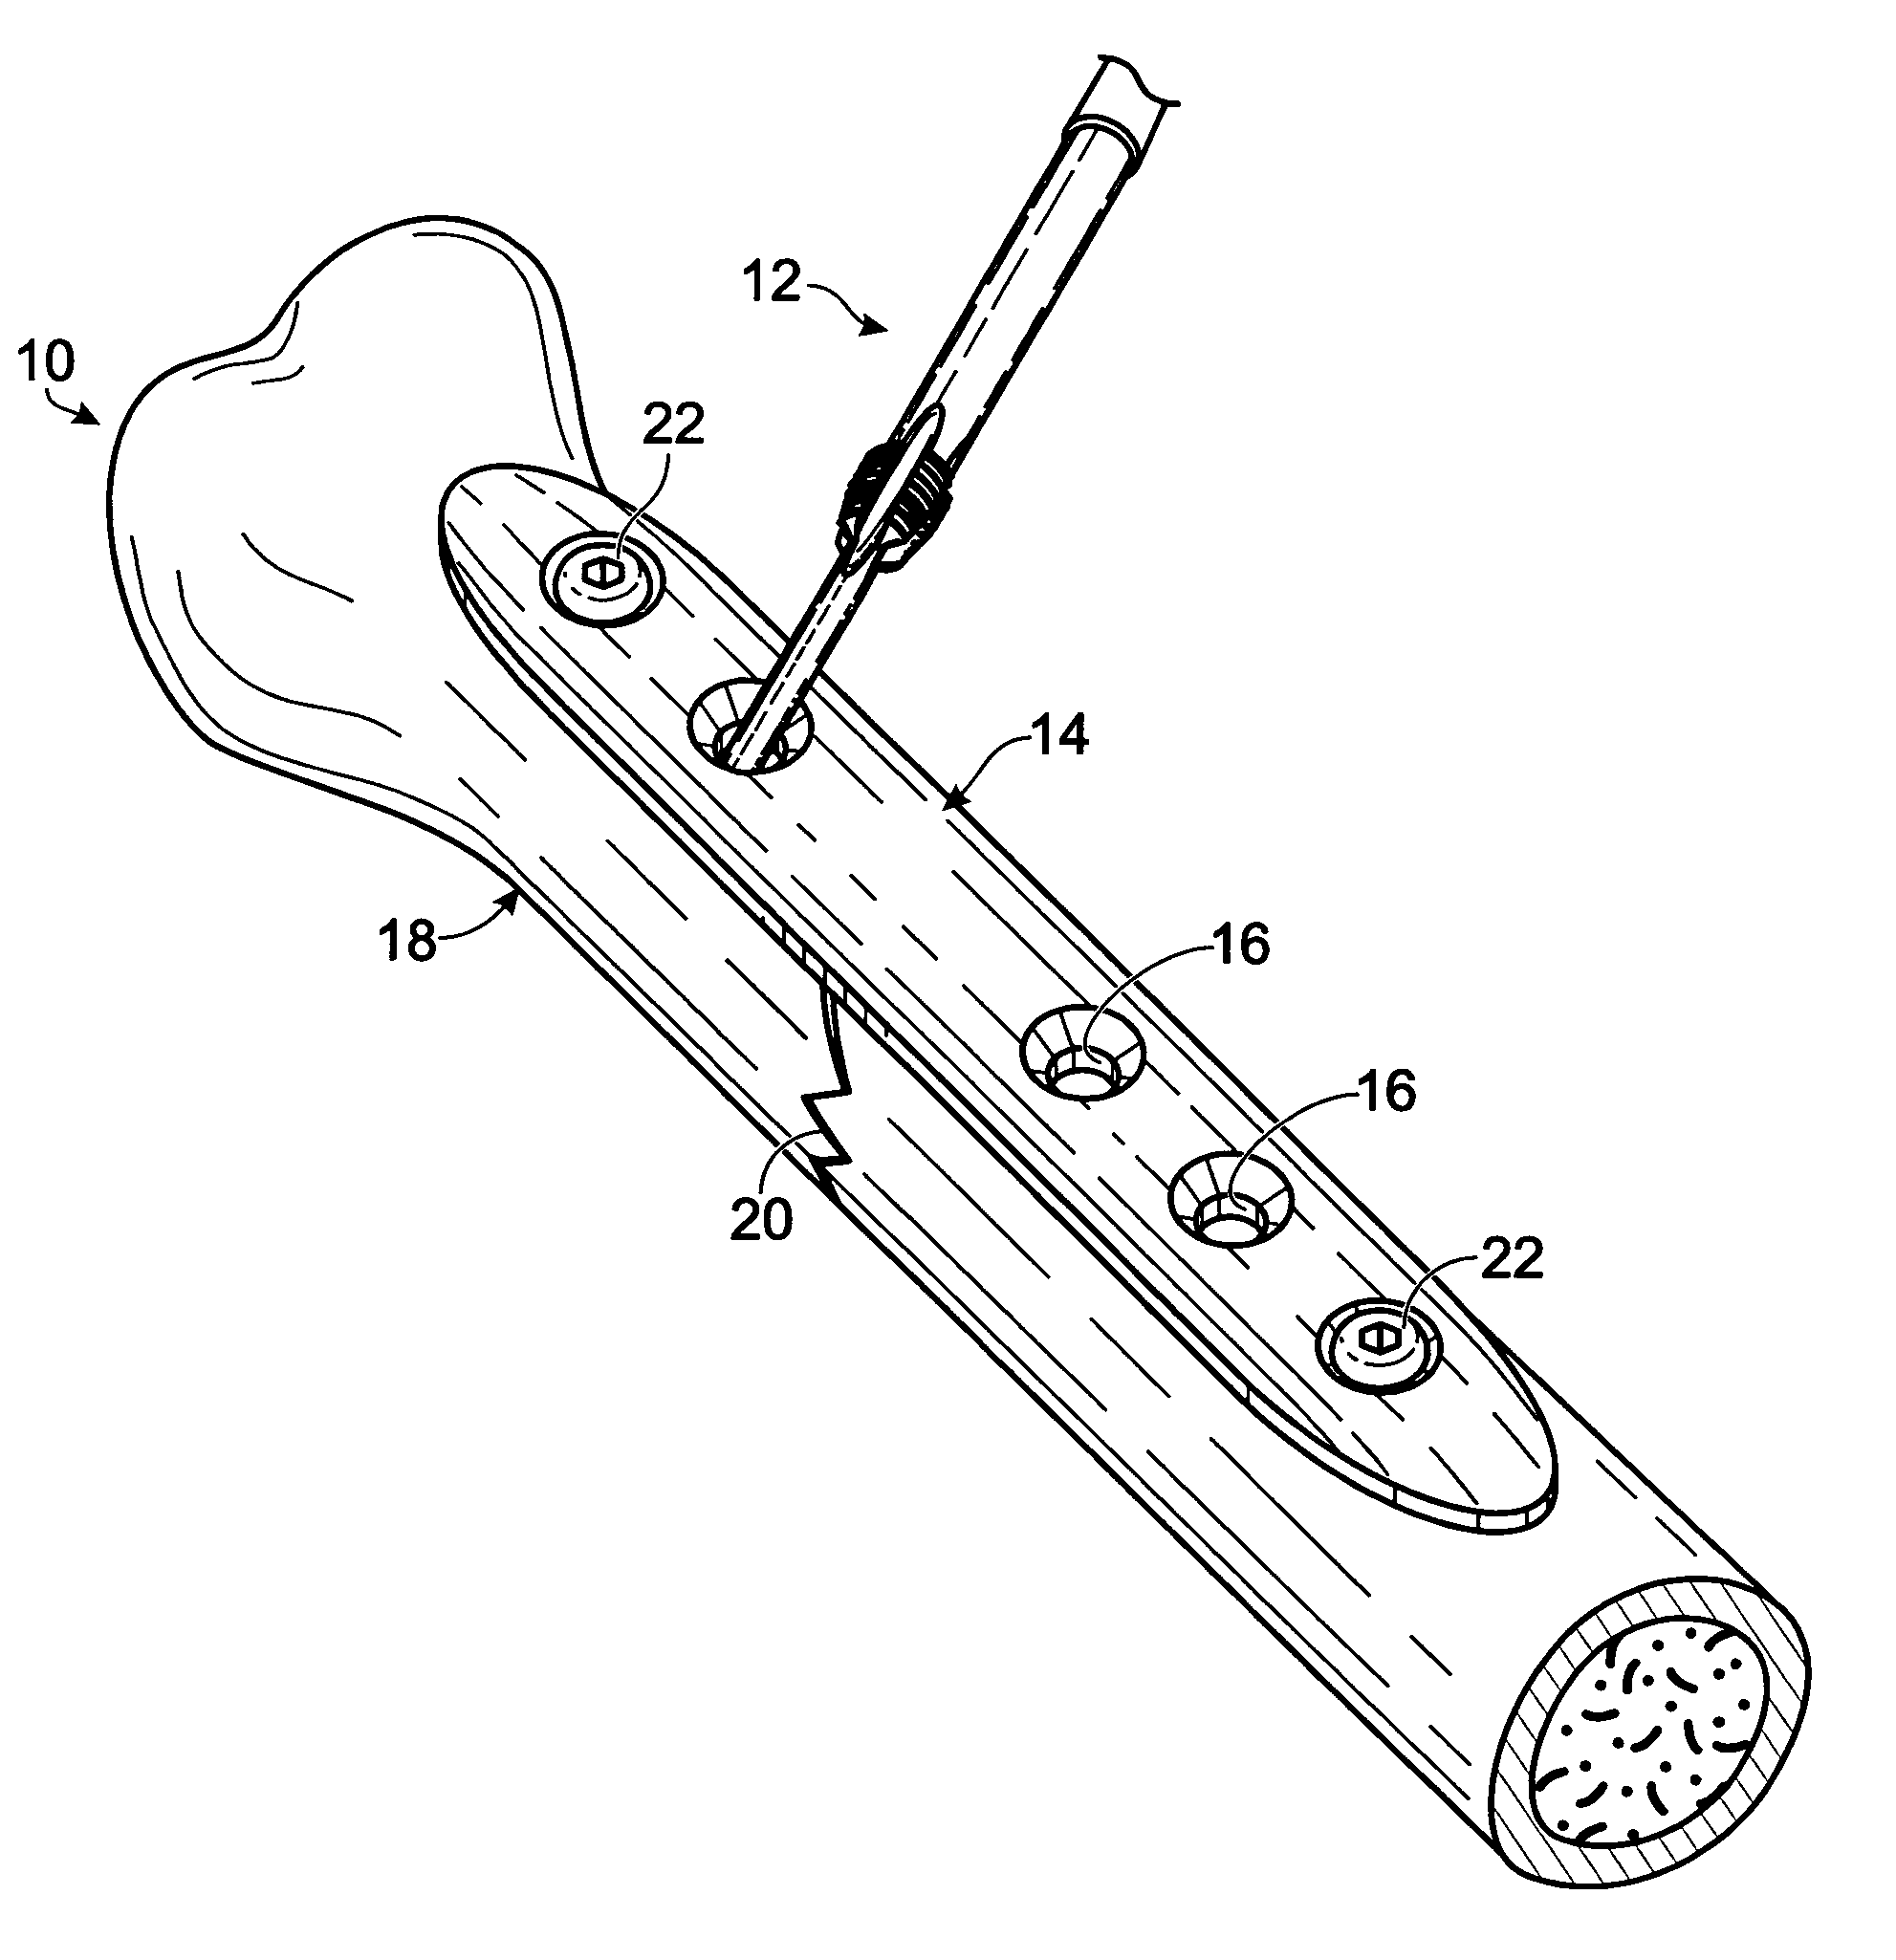 Bone plates with intraoperatively tapped apertures